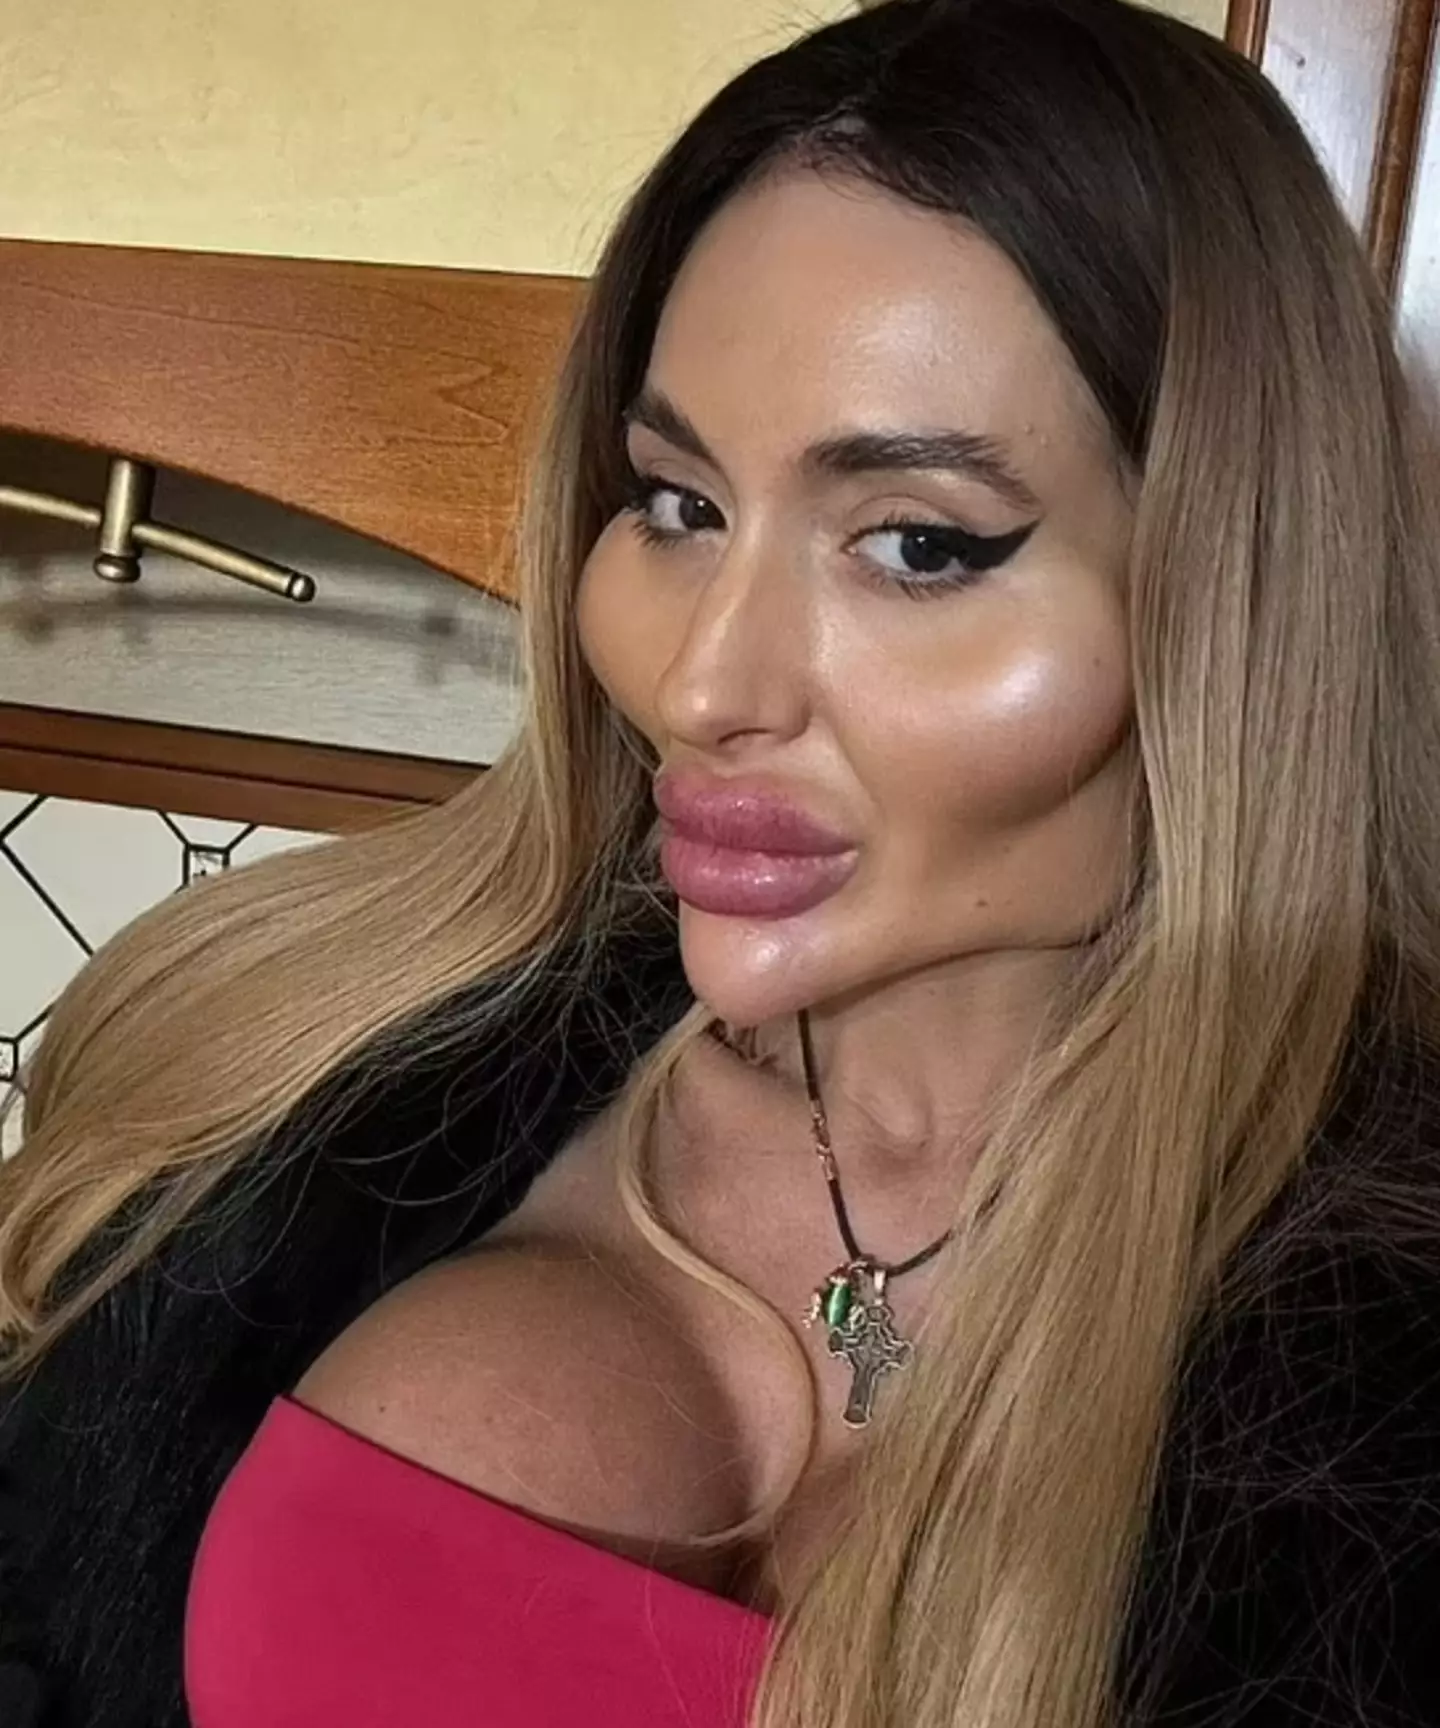 The model has said she 'feels pretty' with her filler.